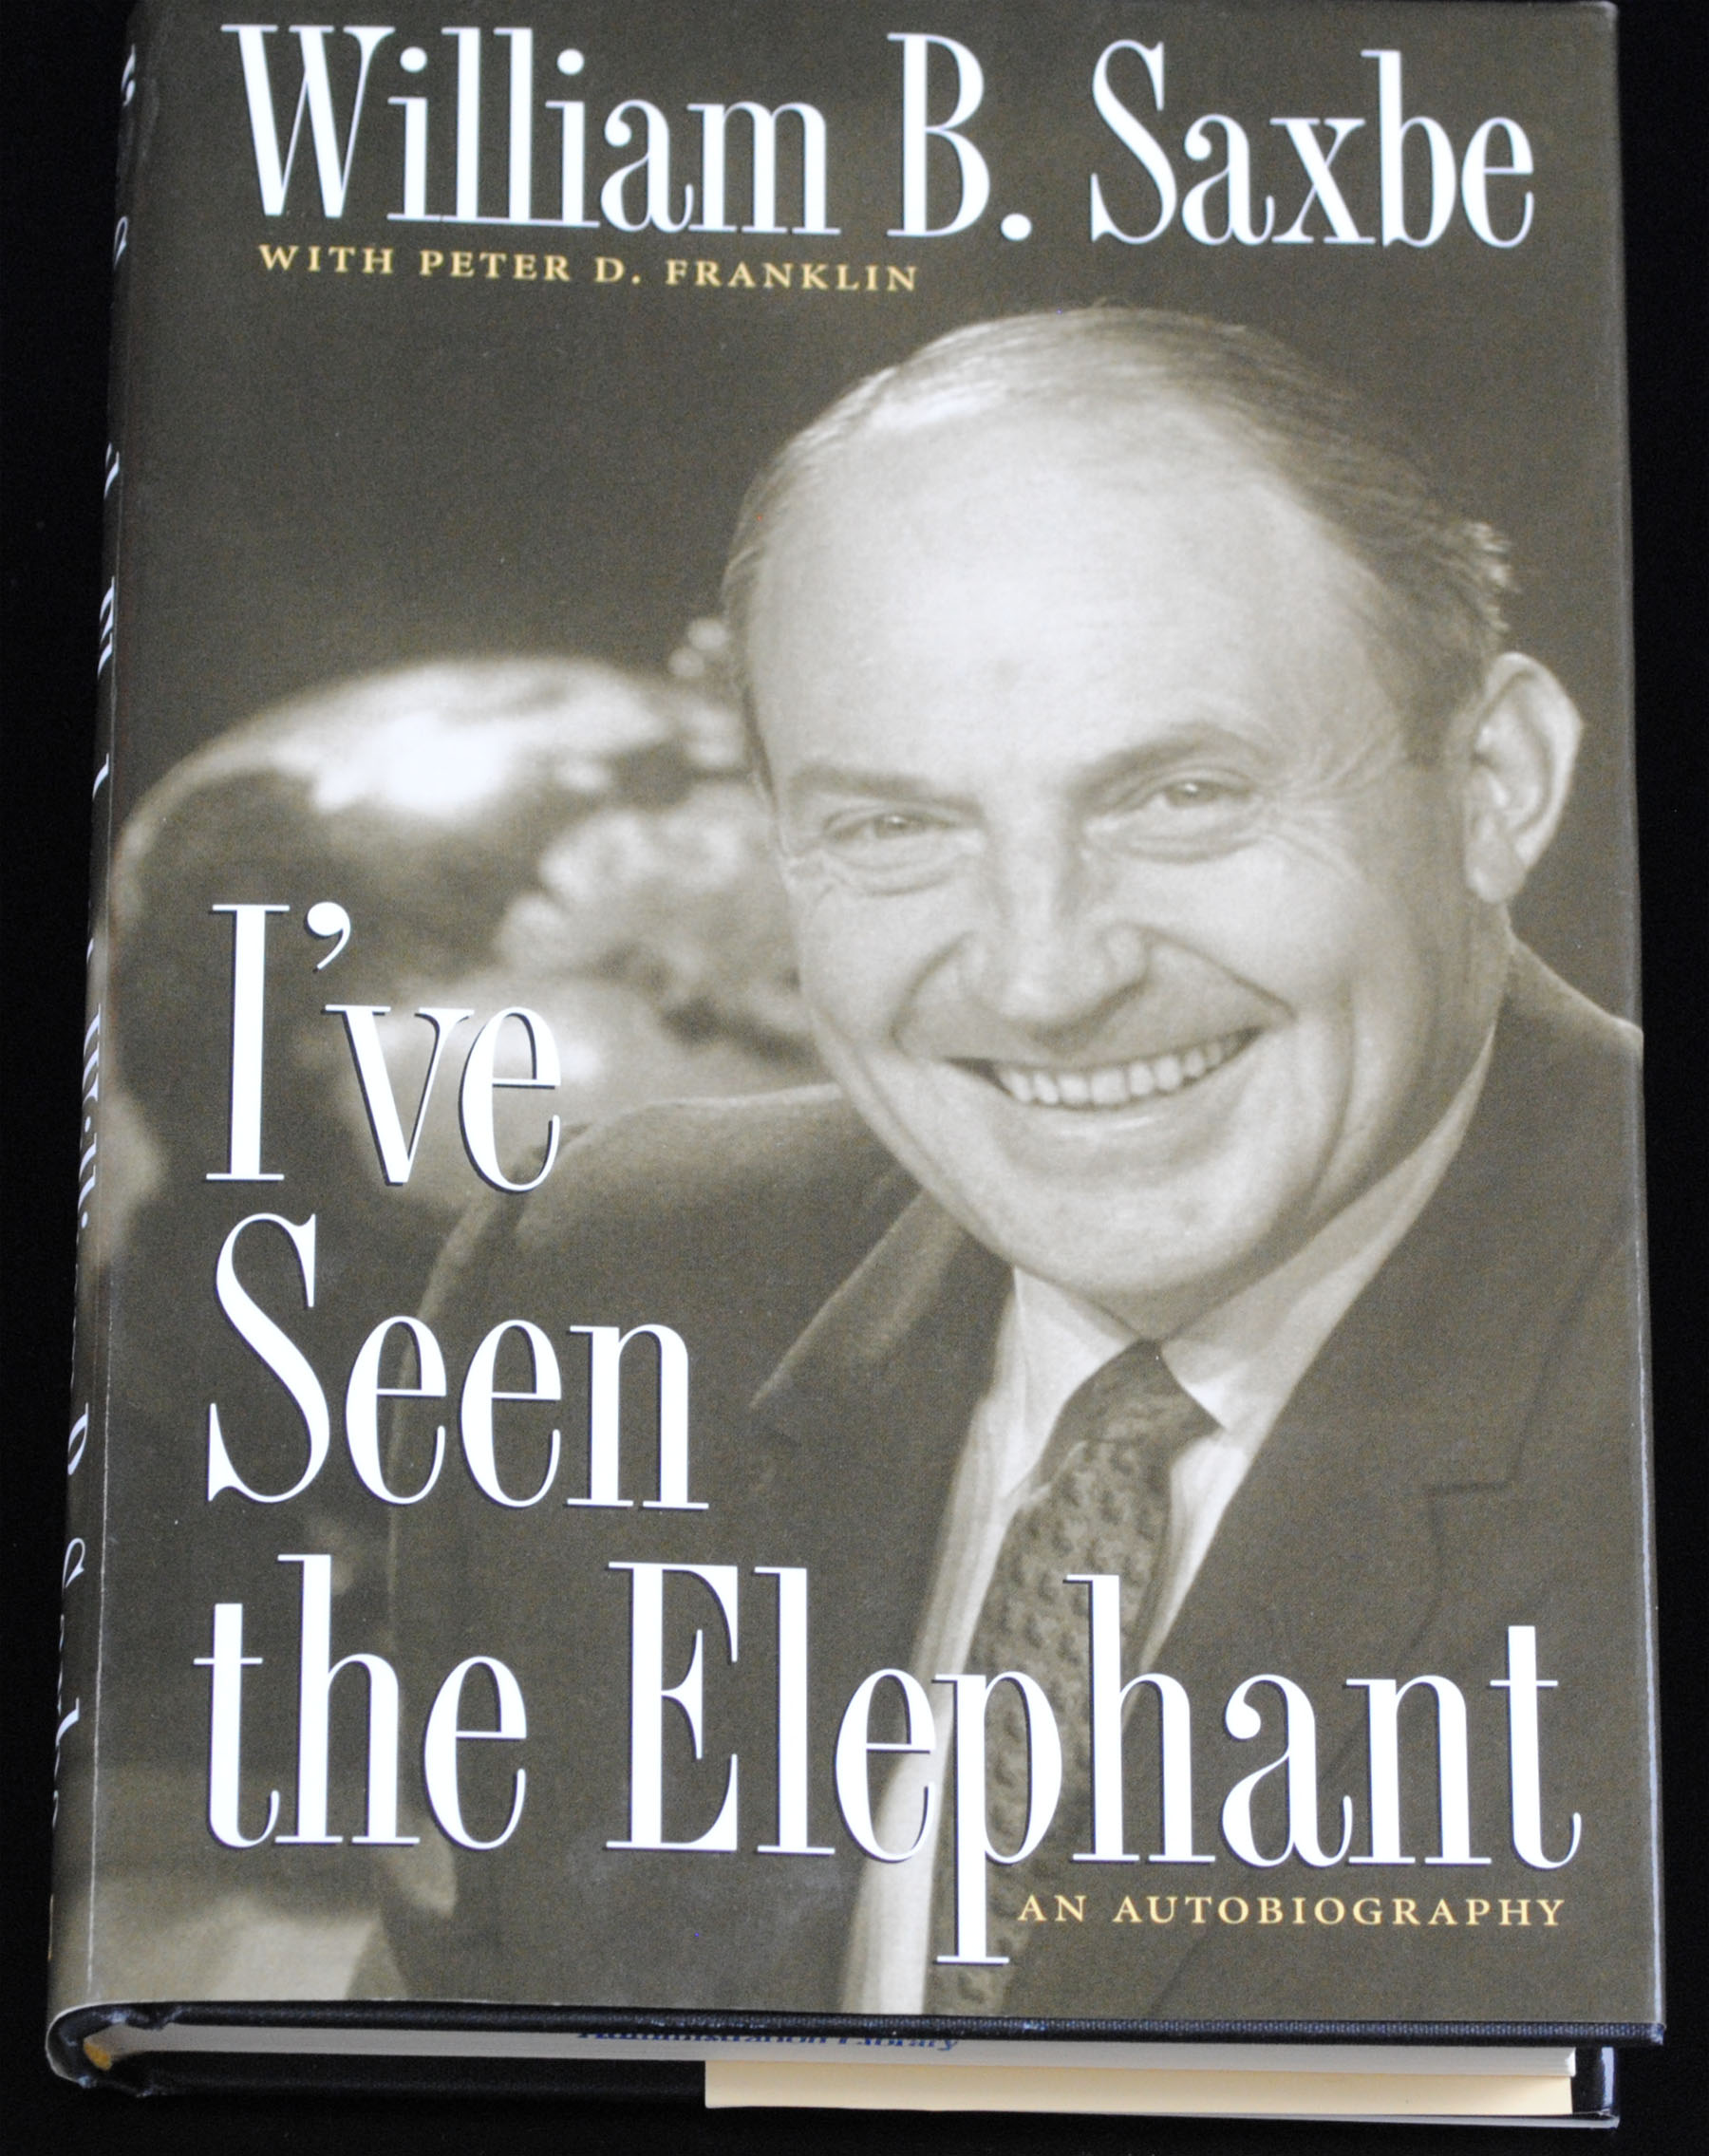 “I’ve Seen the Elephant,” by William B. Saxbe  